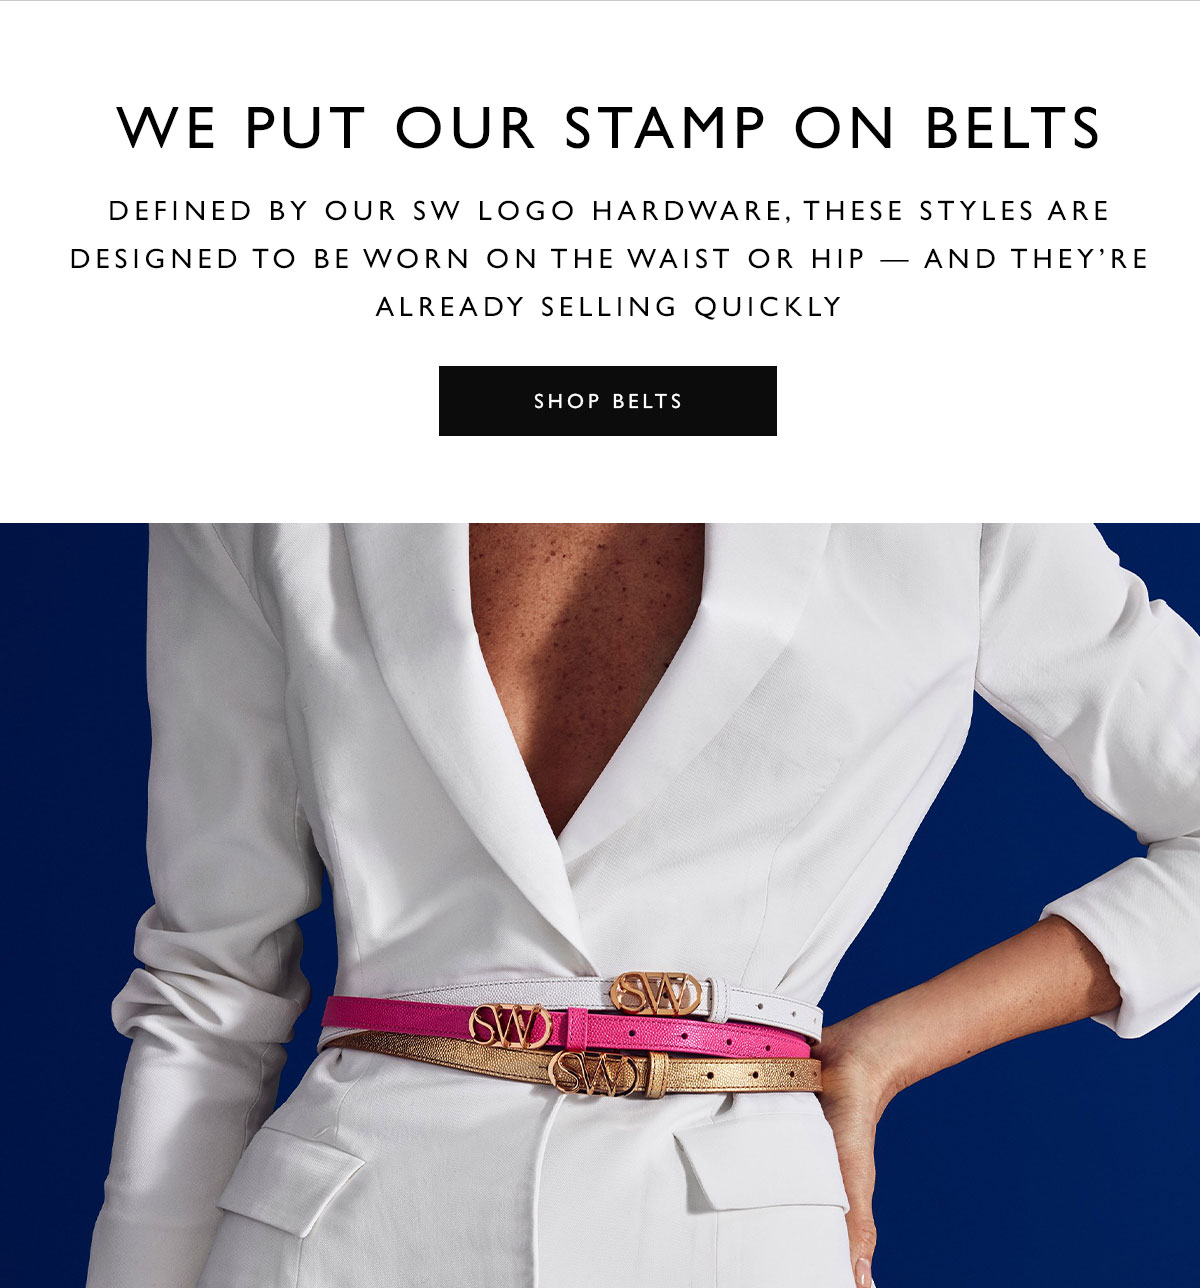 We Put Our Stamp on Belts. Defined by our SW logo hardware, these styles are designed to be worn on the waist or hip — and they’re already selling quickly. SHOP BELTS